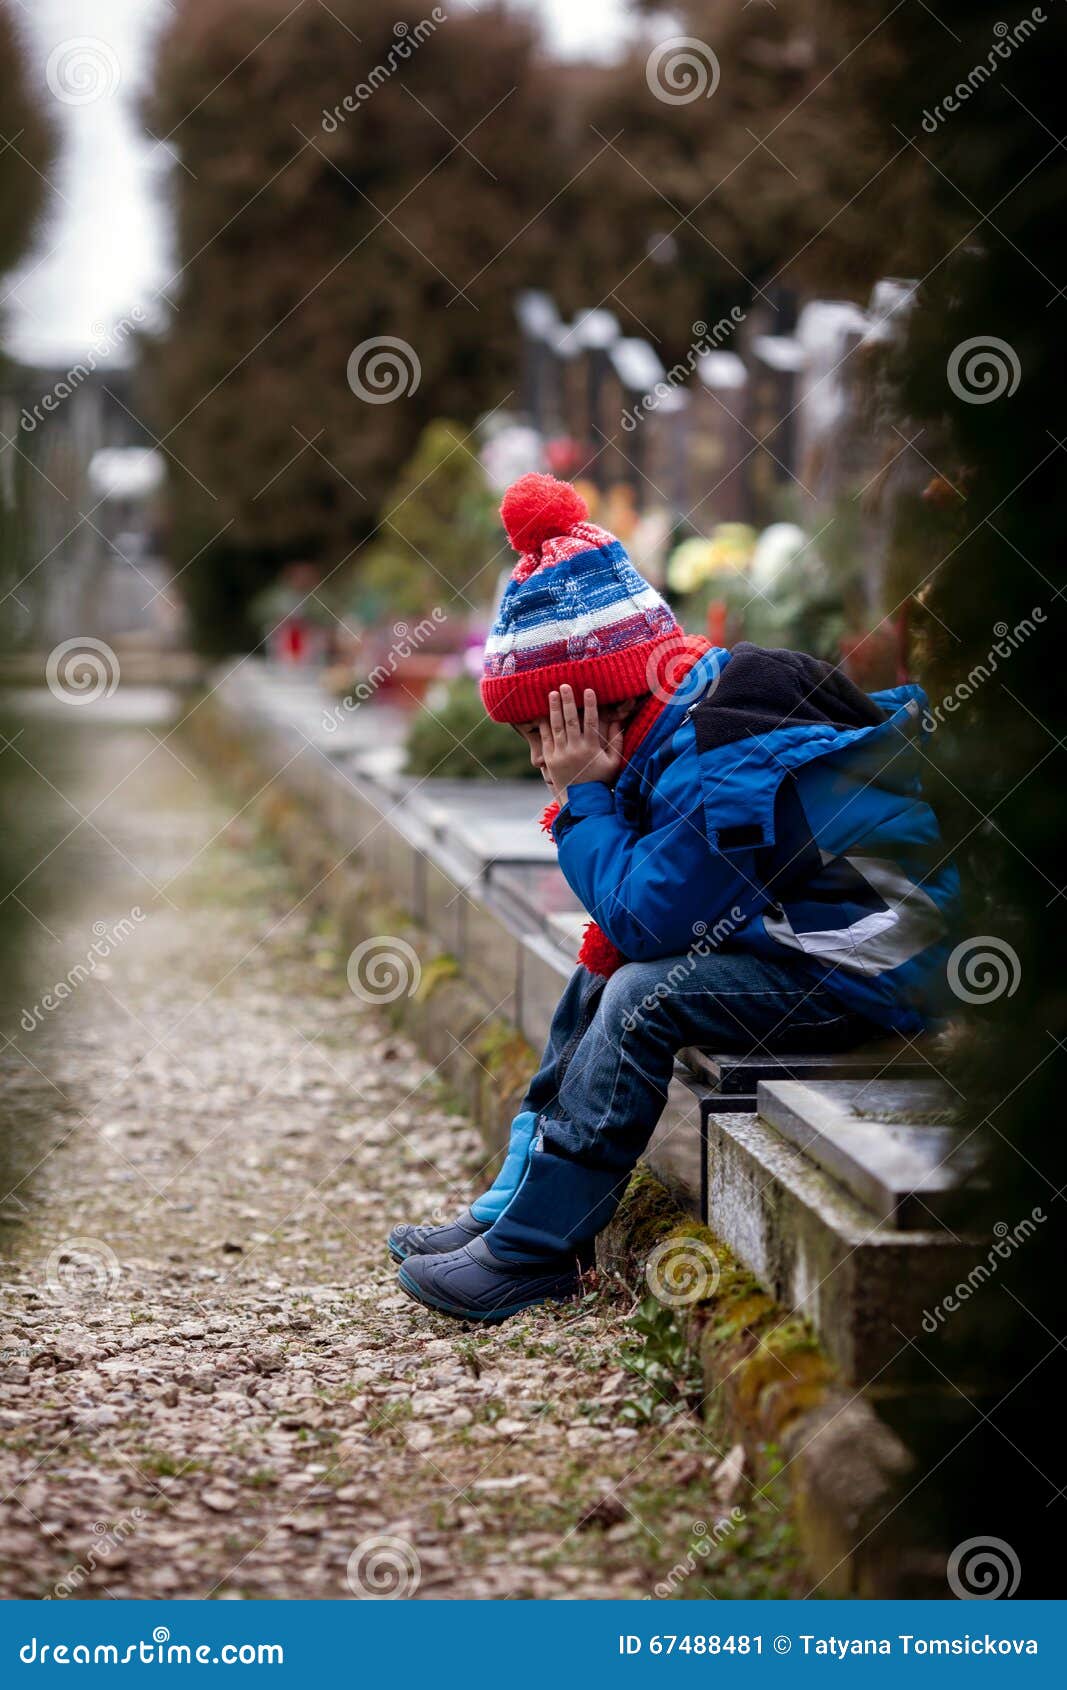 Sad Little Boy, Sitting on a Grave in a Cemetery Stock Image ...